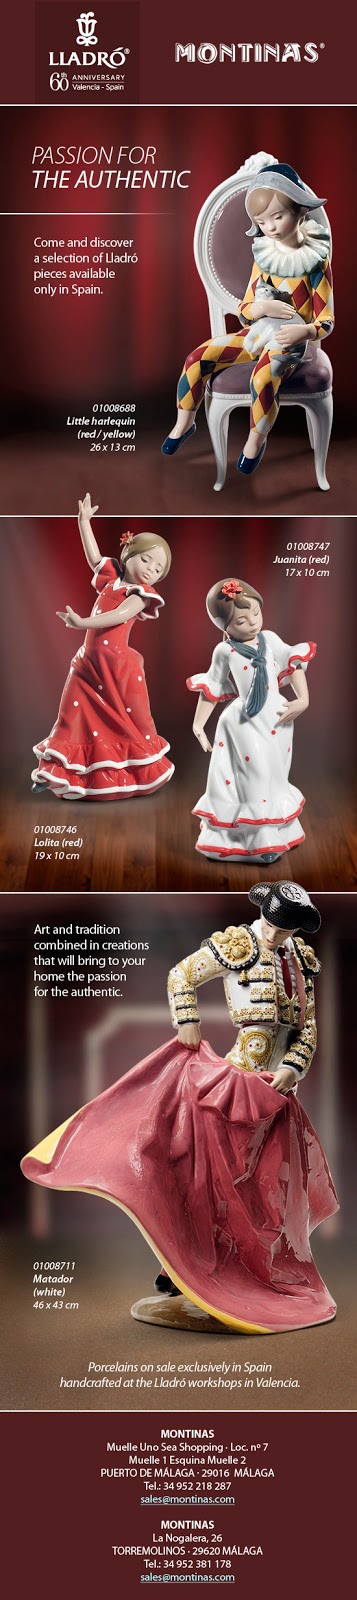 Lladro Passion for THE AUTHENTIC